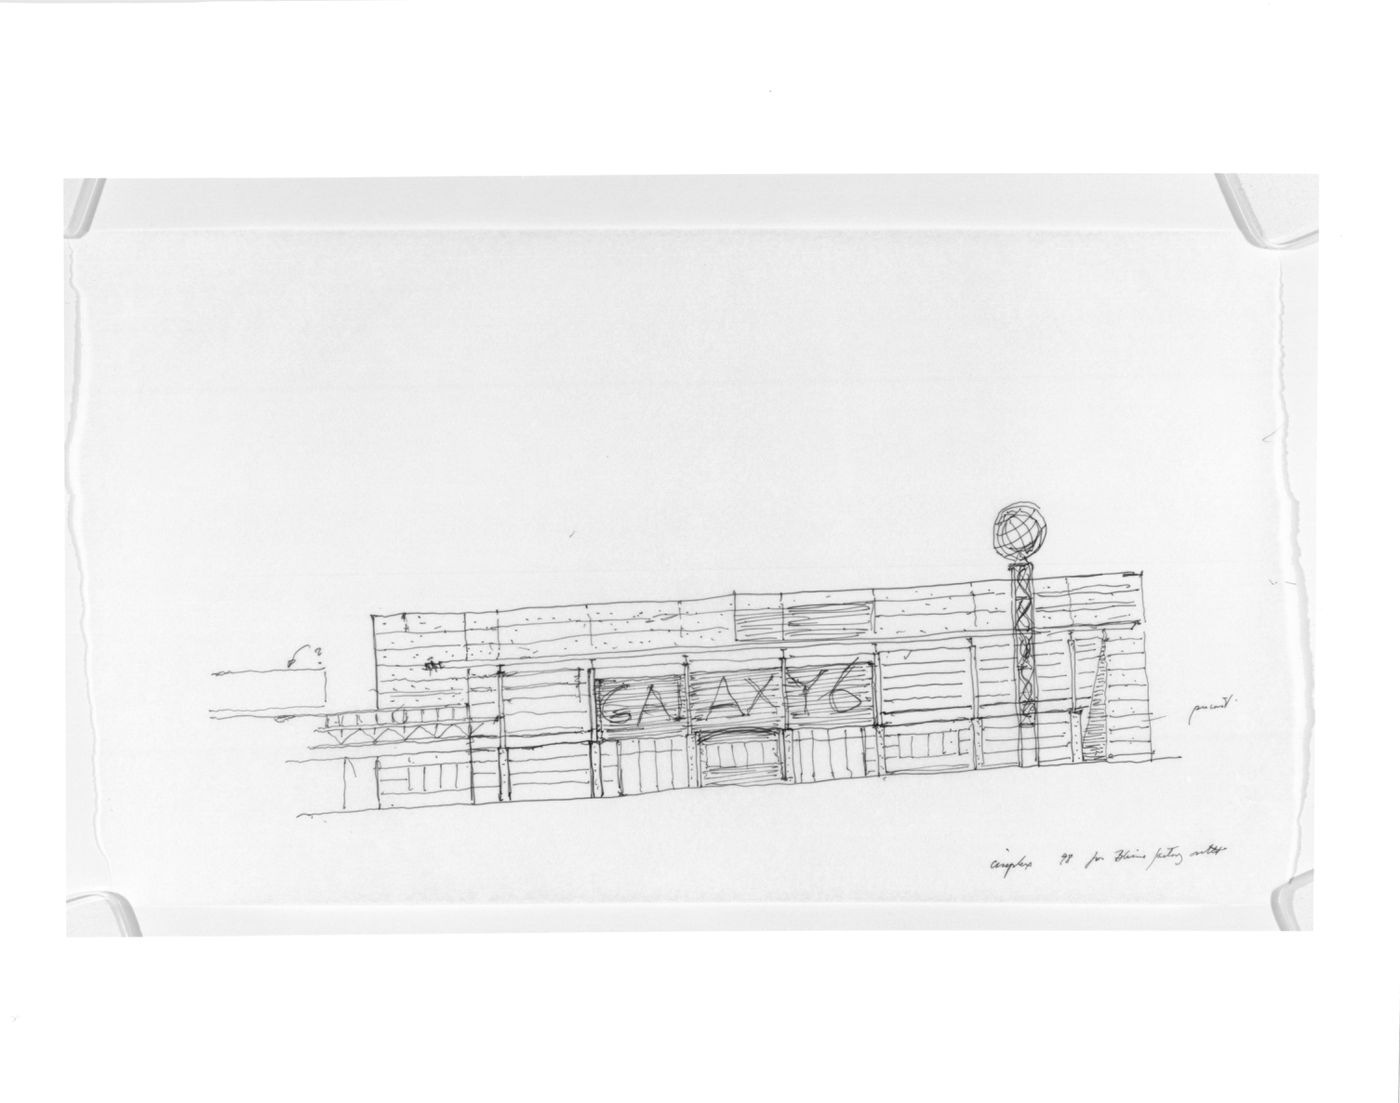 Elevation for the Peace Arch Factory Outlets, Blaine, Washington